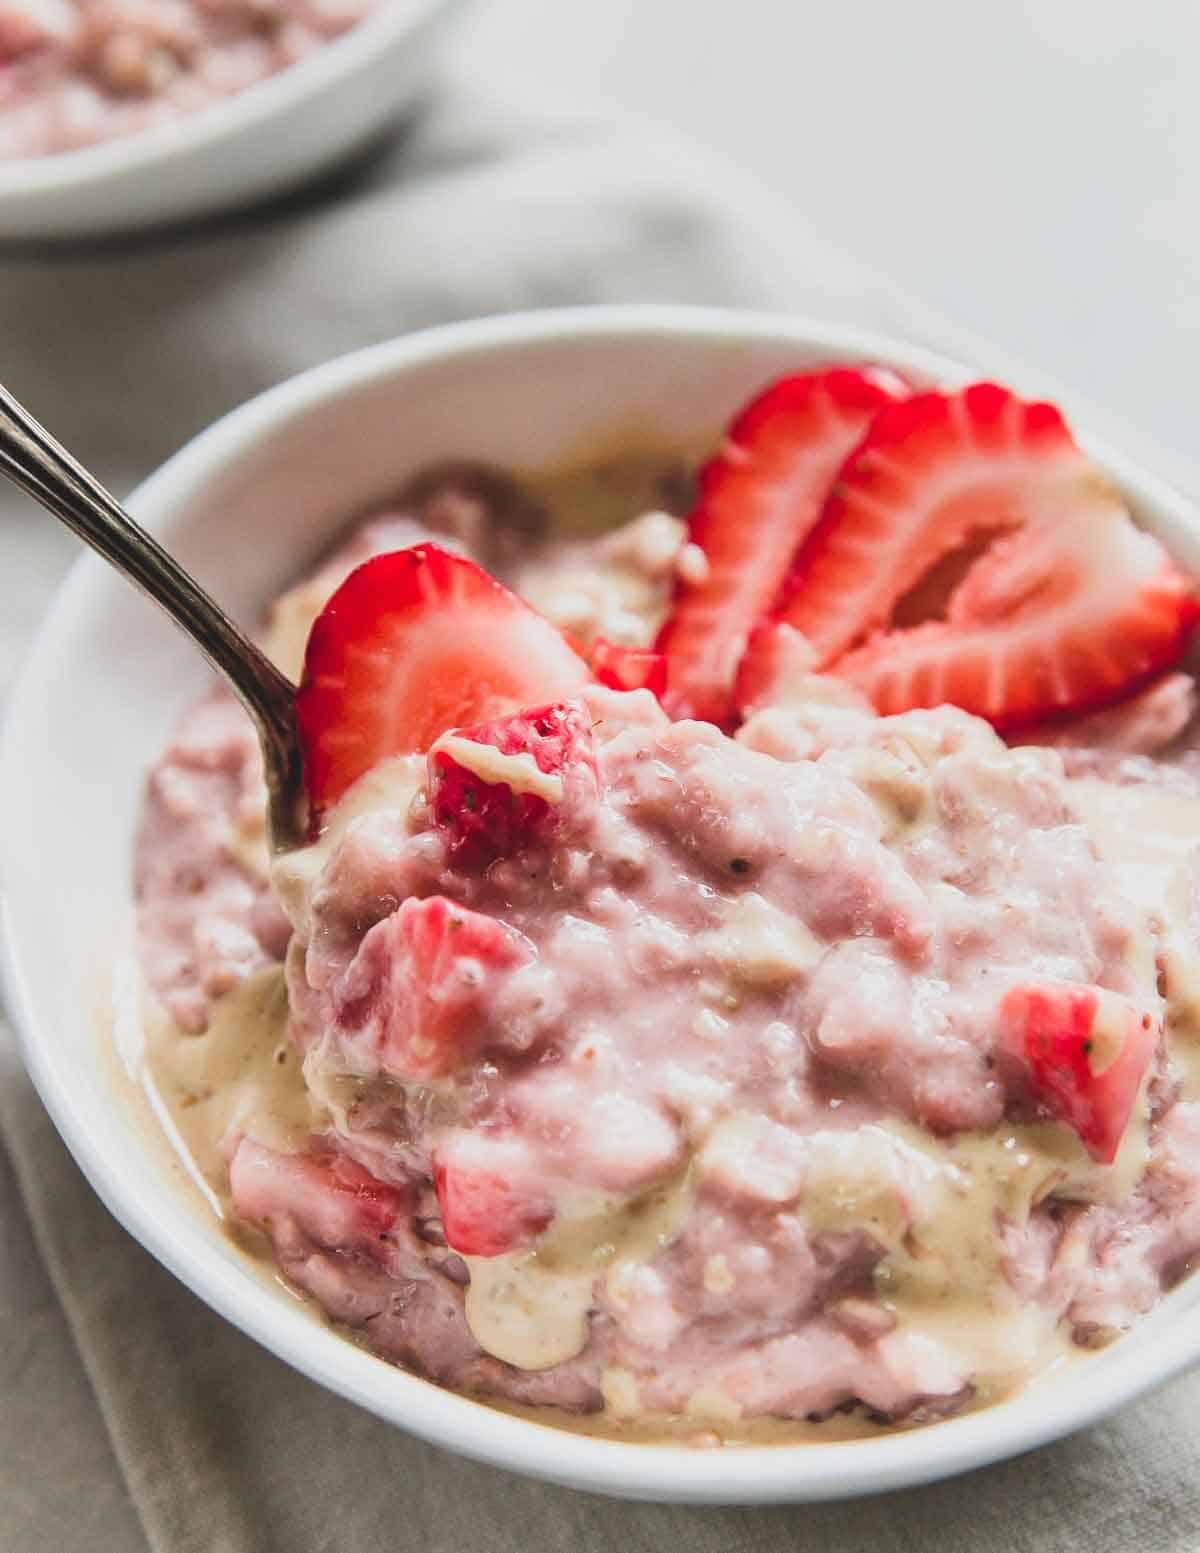 Strawberry oatmeal with fresh strawberries in a bowl.